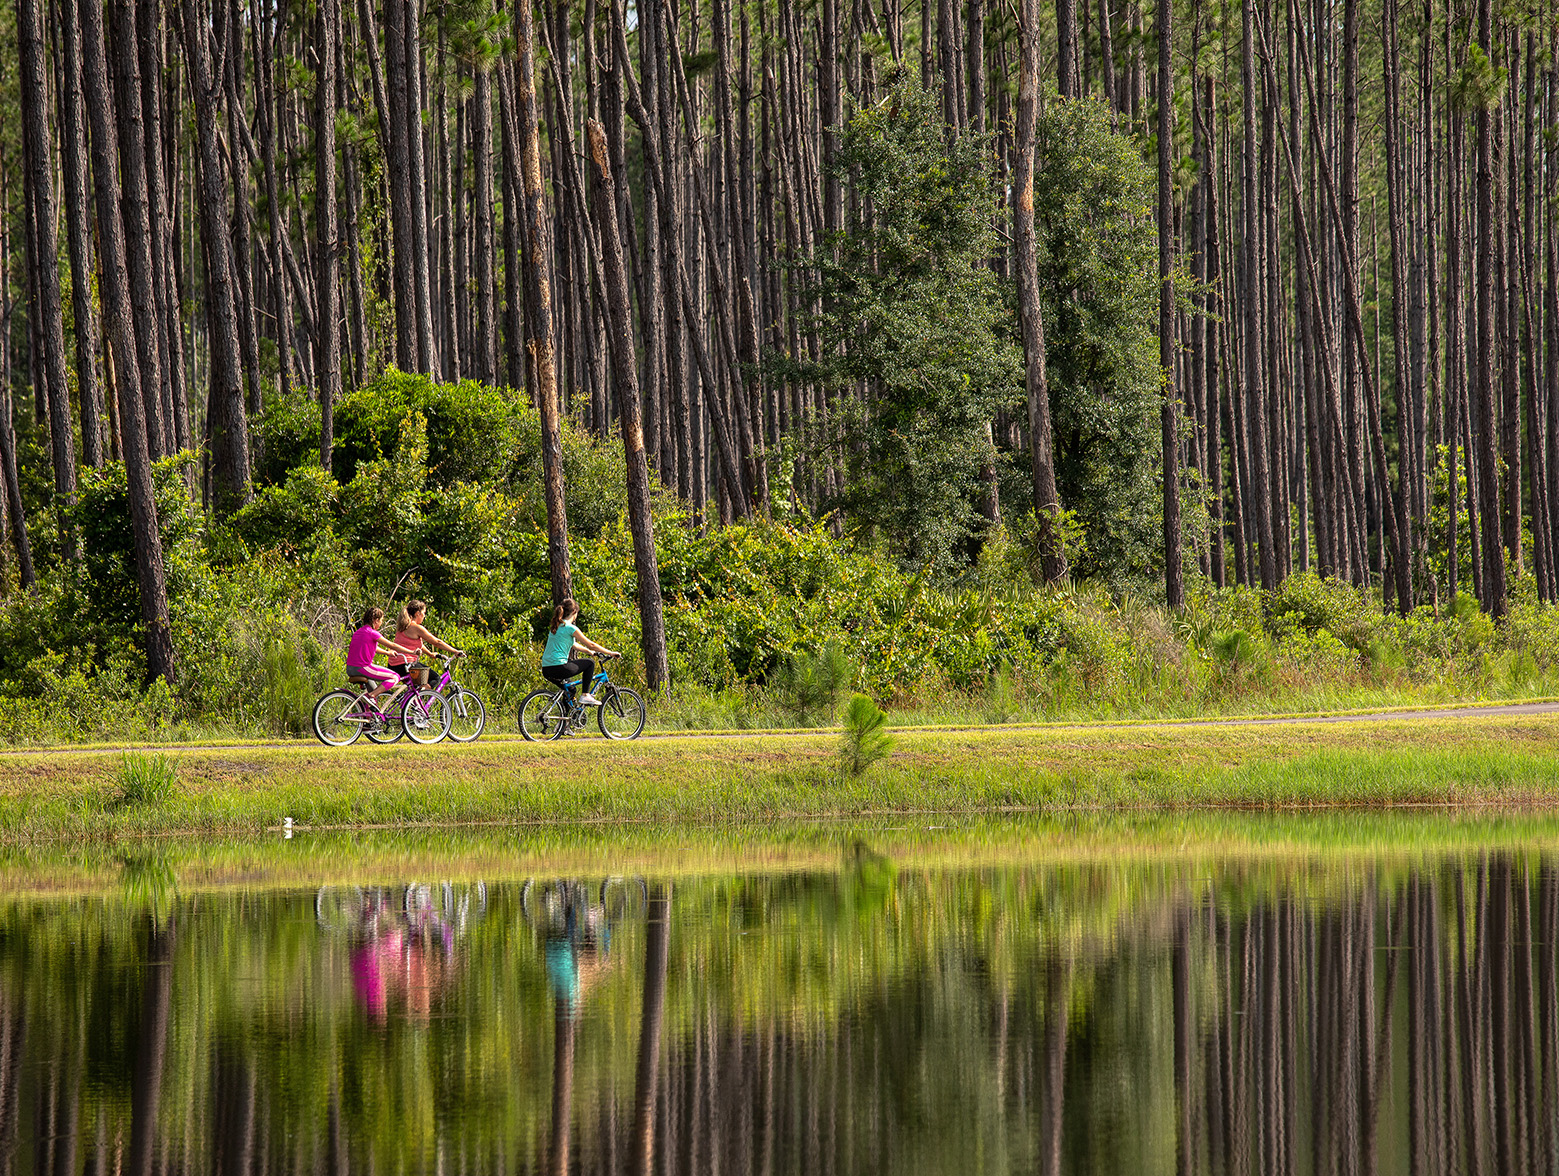 Three people ride bikes down path with reflection in the water.